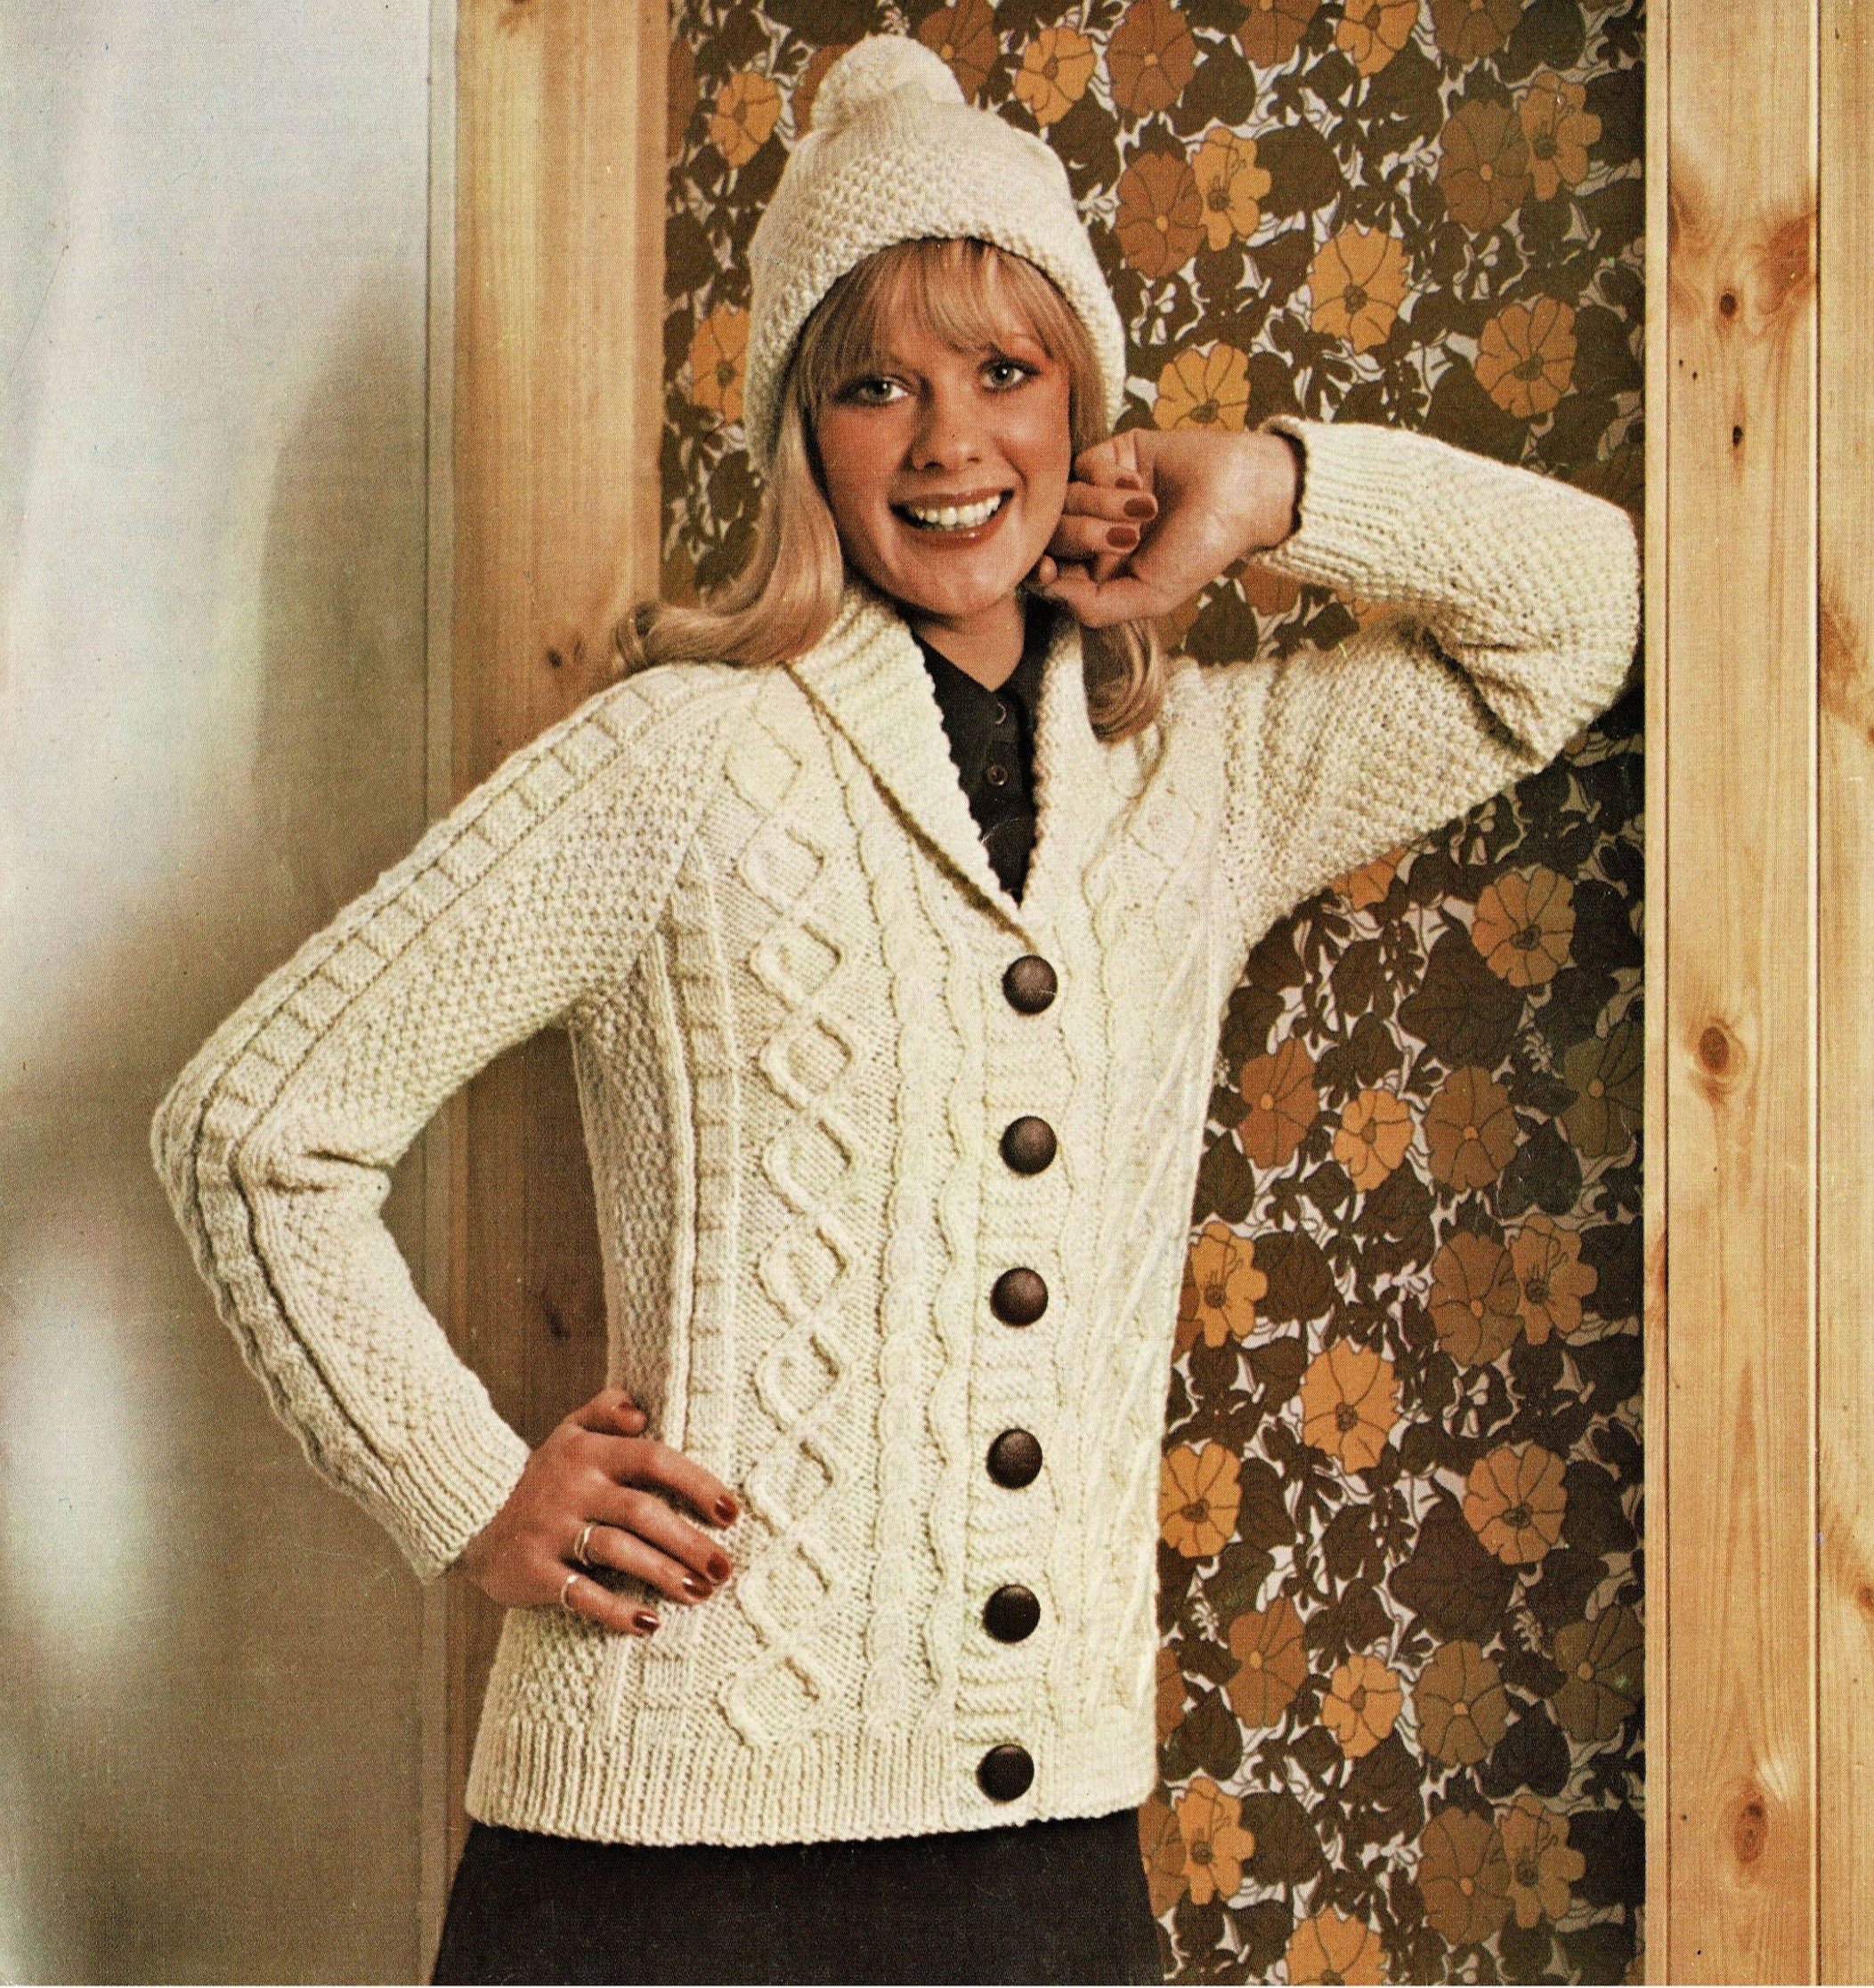 Ladies Lovely Aran Jacket With Shawl Collar and Cap in Two Yarn Weights,  Vintage Knitting Pattern, PDF, Digital Download C942 